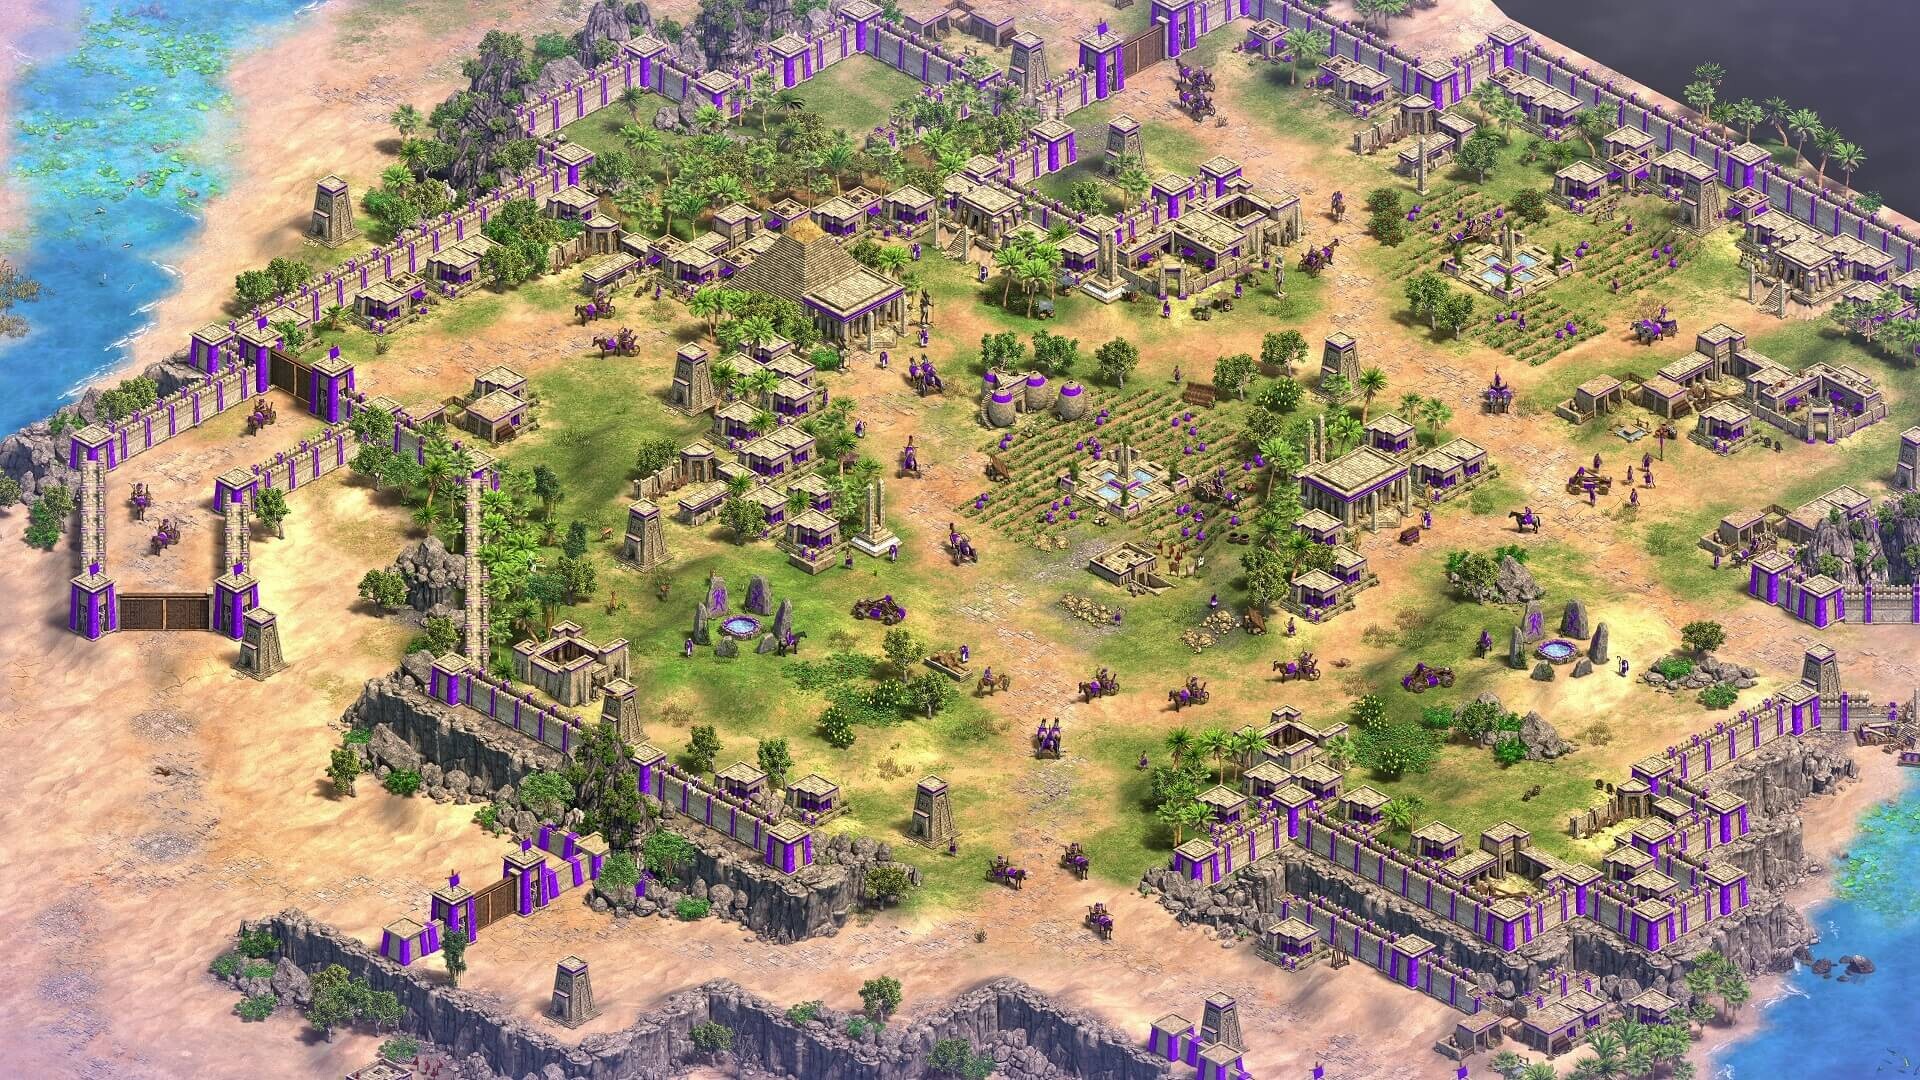 Age of Empires II Definitive Edition Return of Rome Expansion will Bring Back Classic RTS Memories -